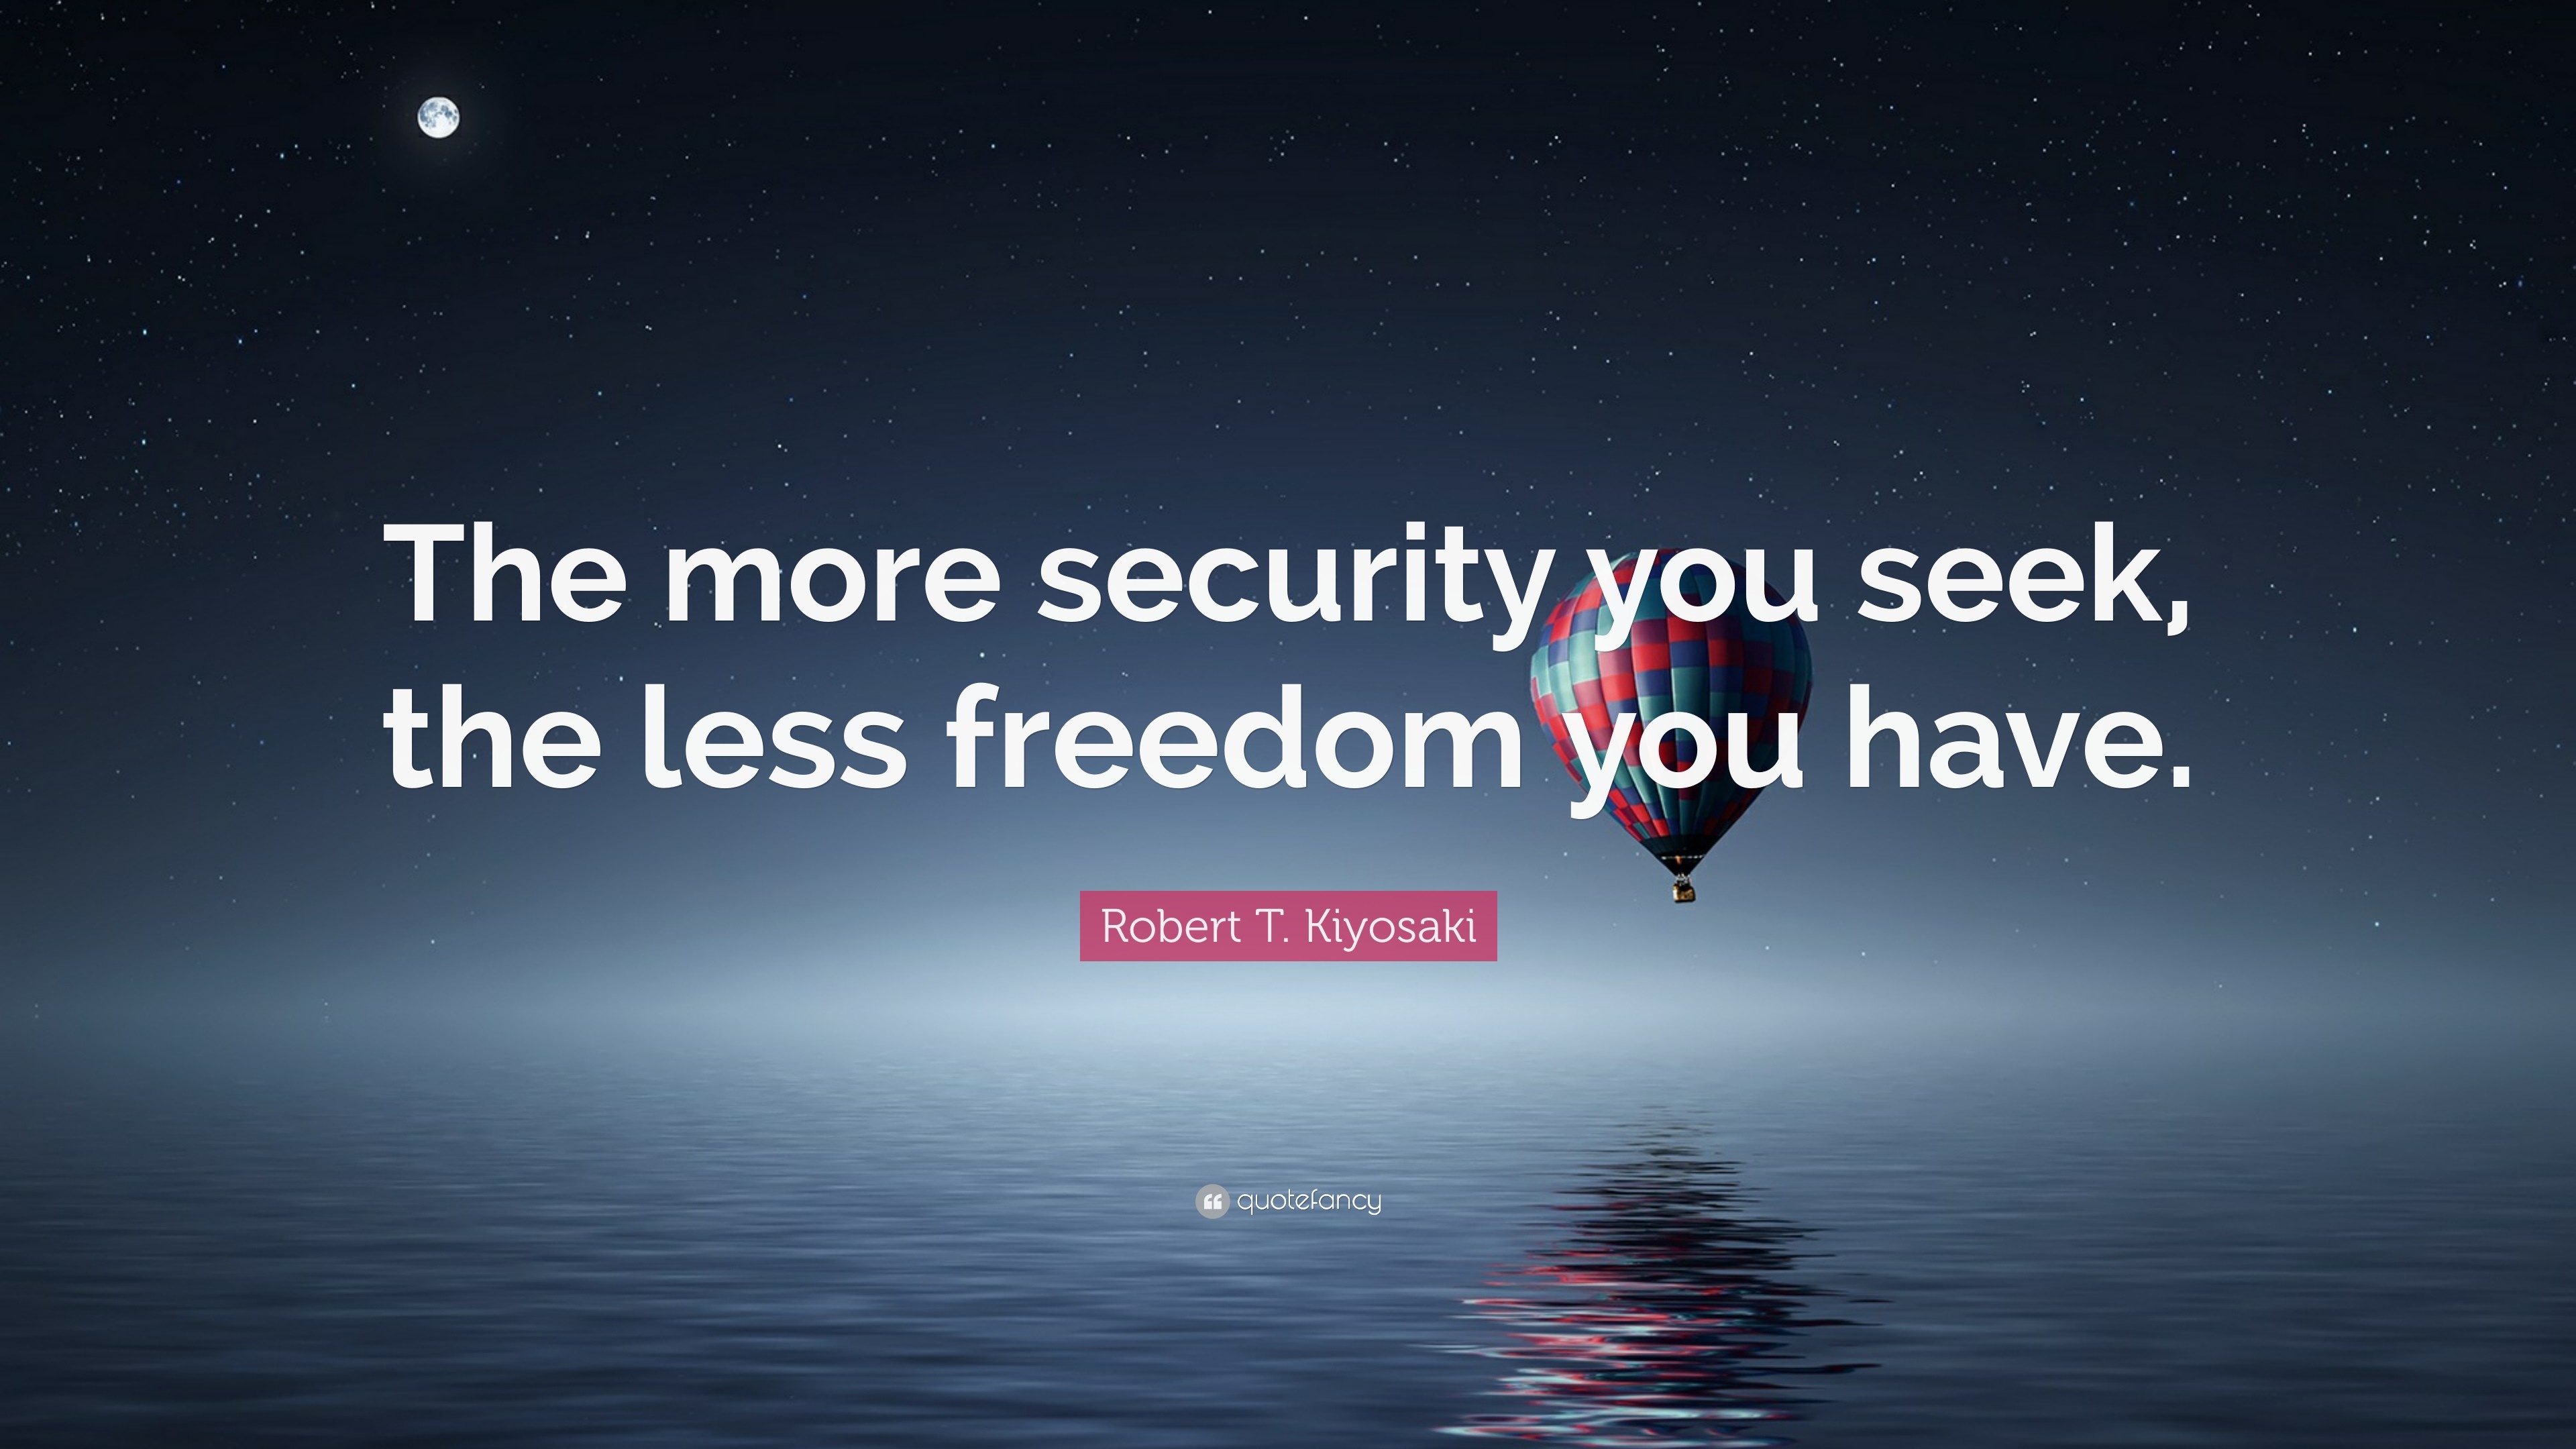 3840x2160 Robert T. Kiyosaki Quote: “The more security you seek, the less freedom